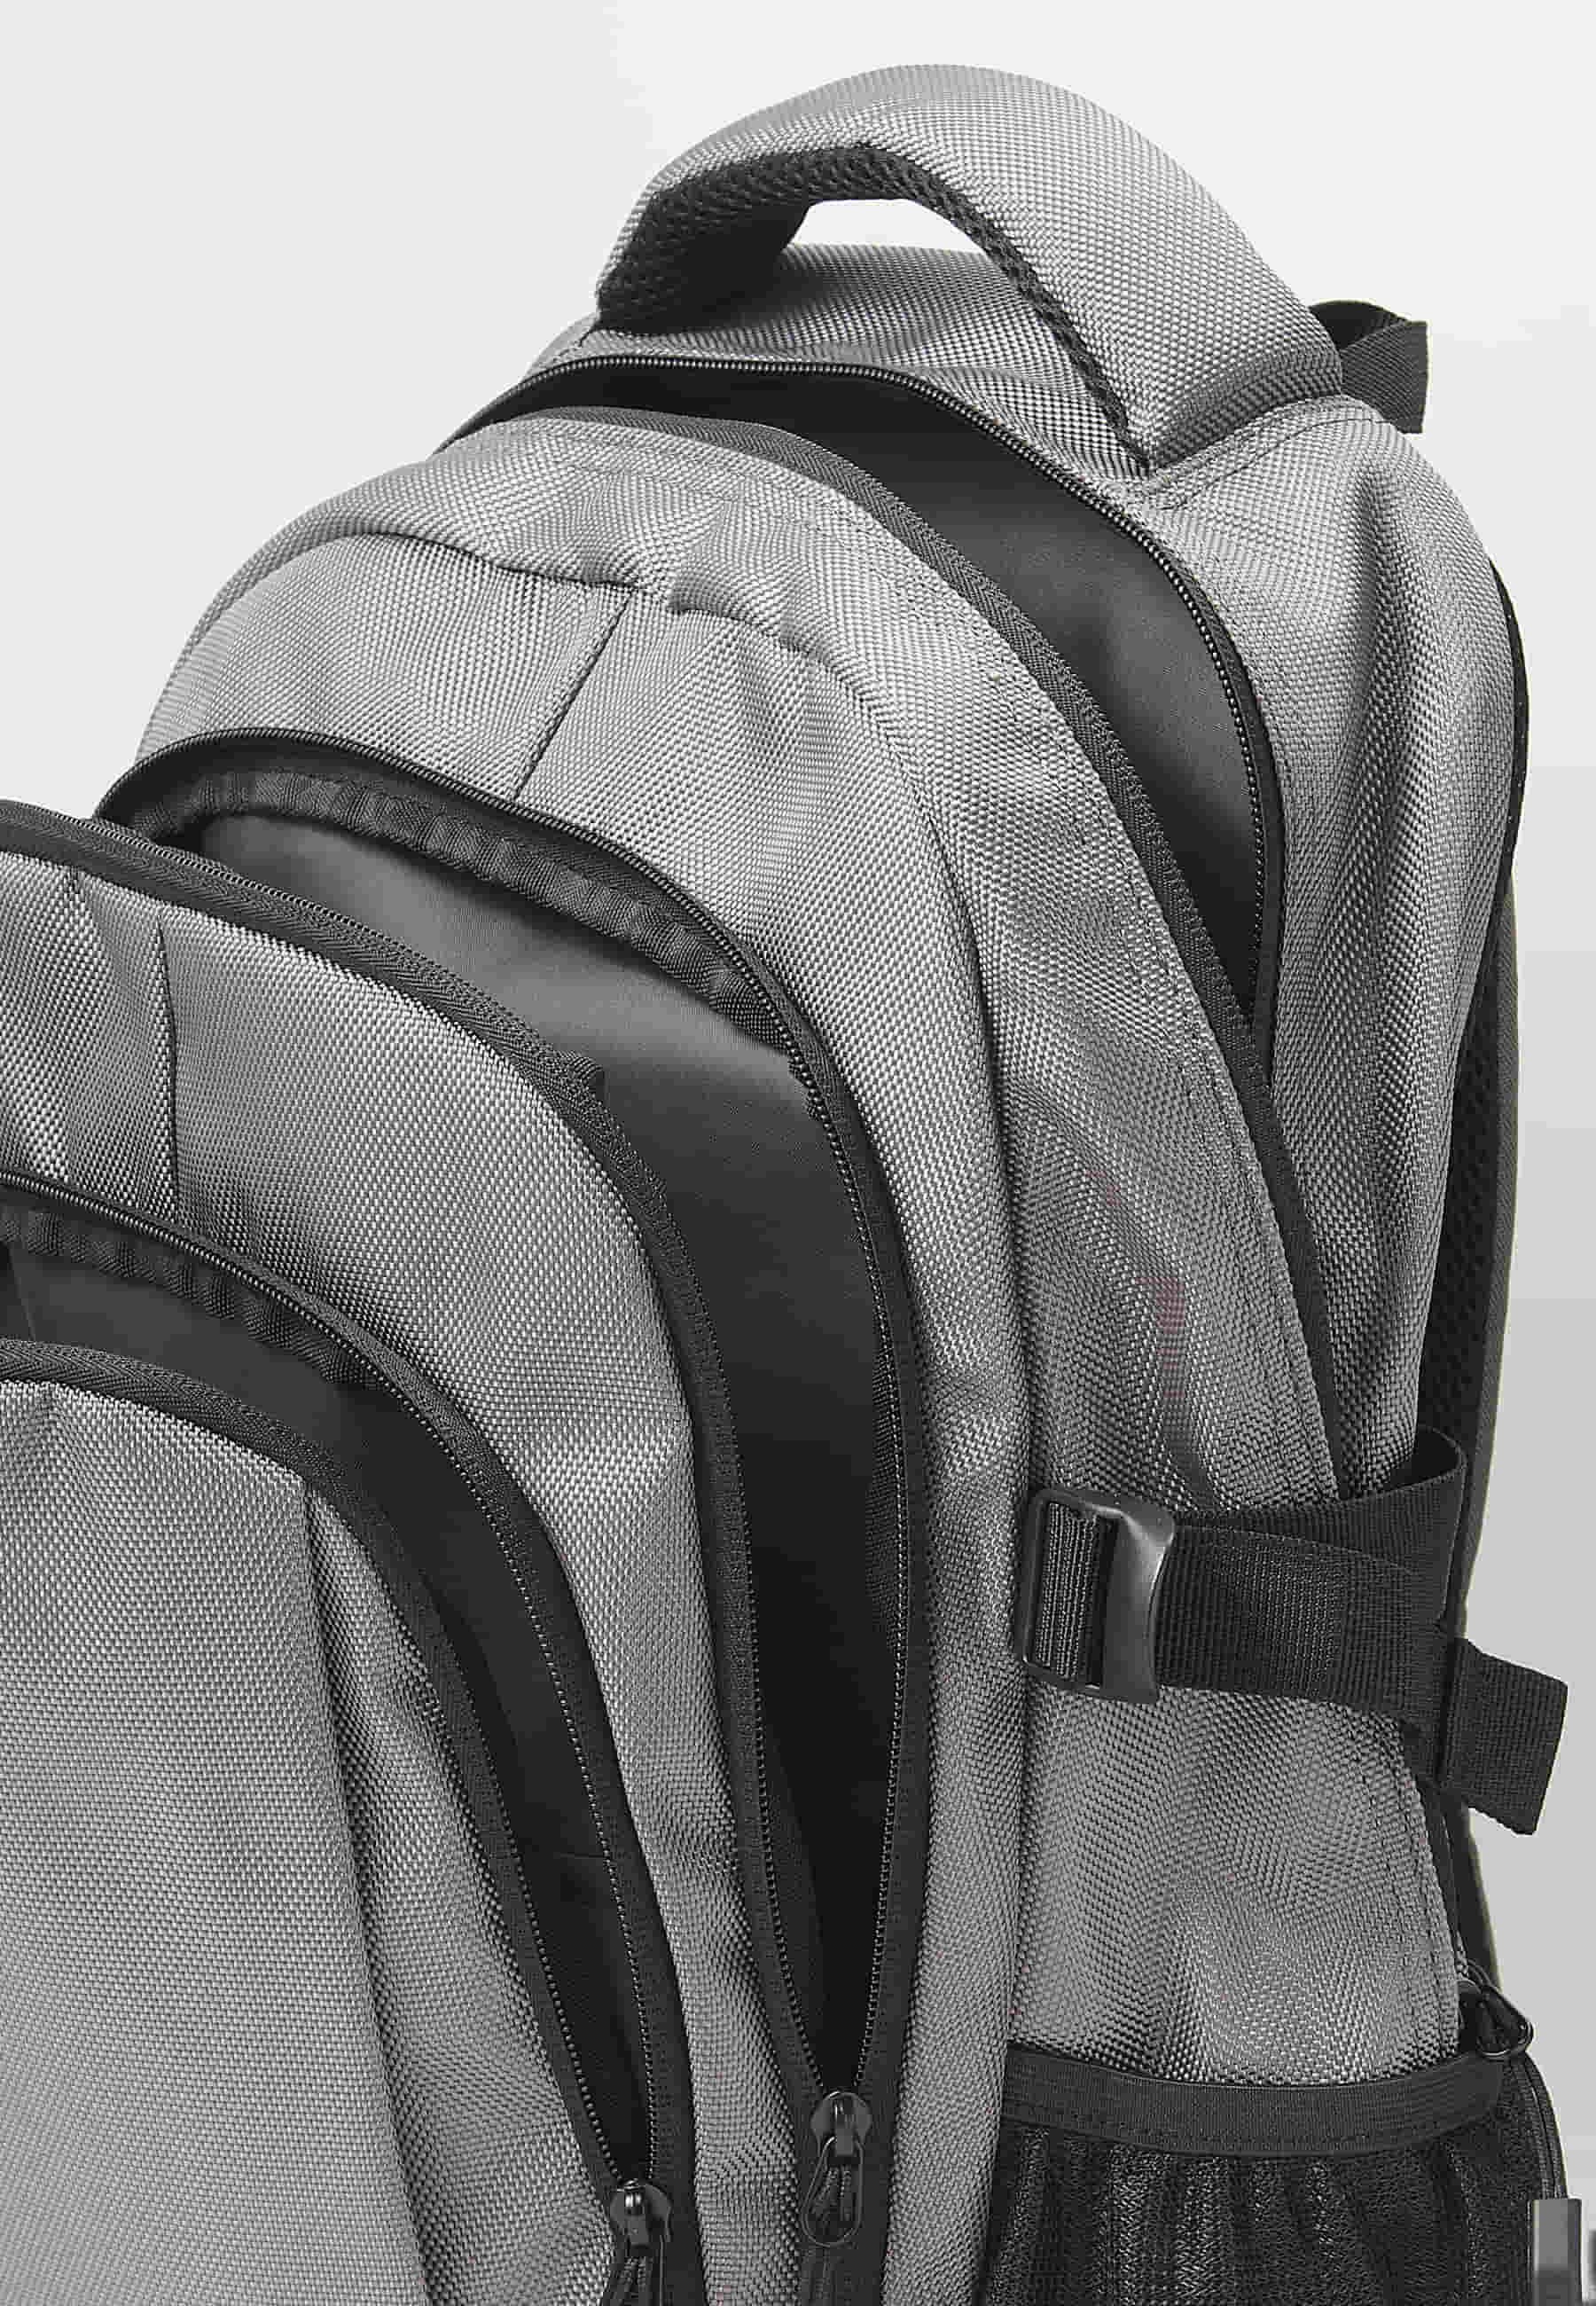 Koröshi backpack with three zippered compartments, one for laptop, with Gray interior pockets 3